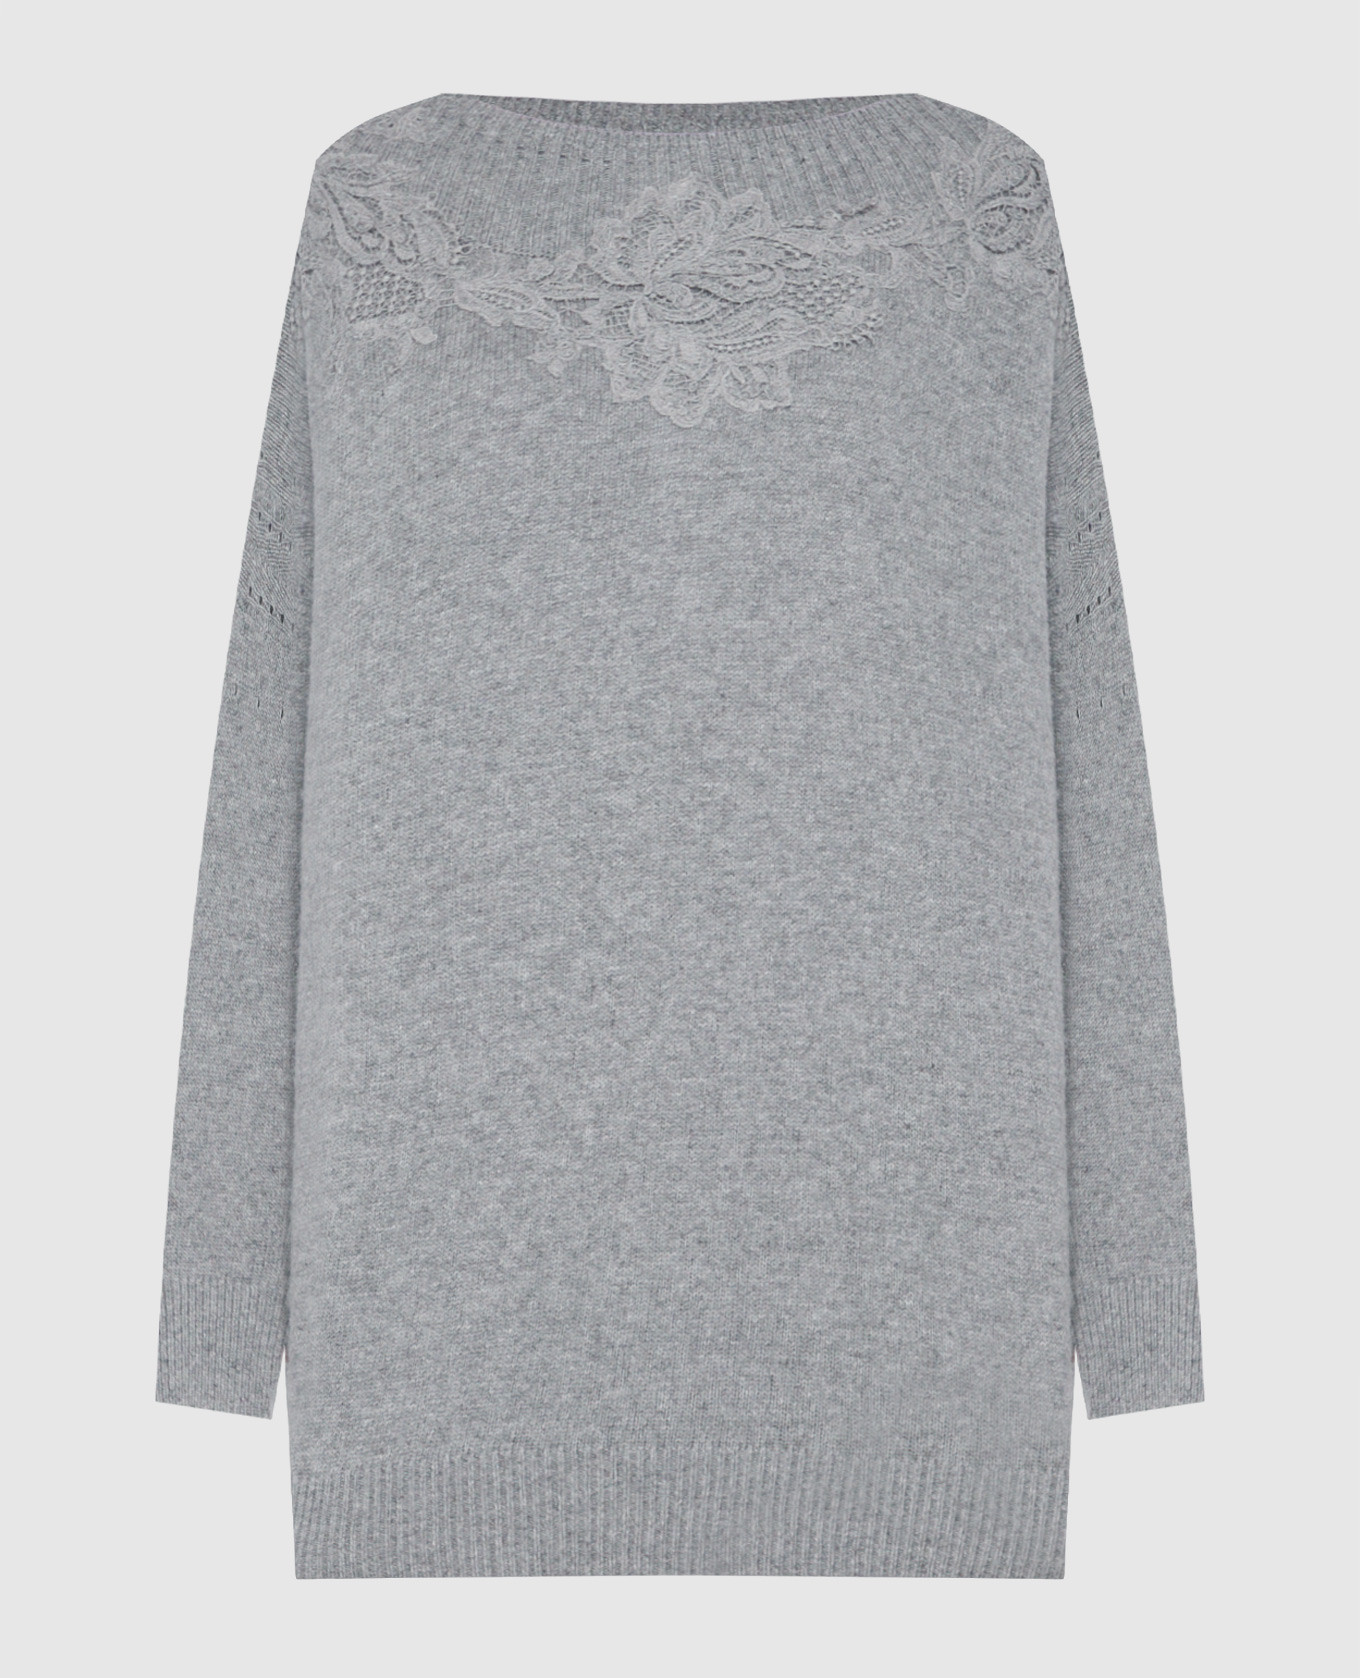 Gray jumper with lace